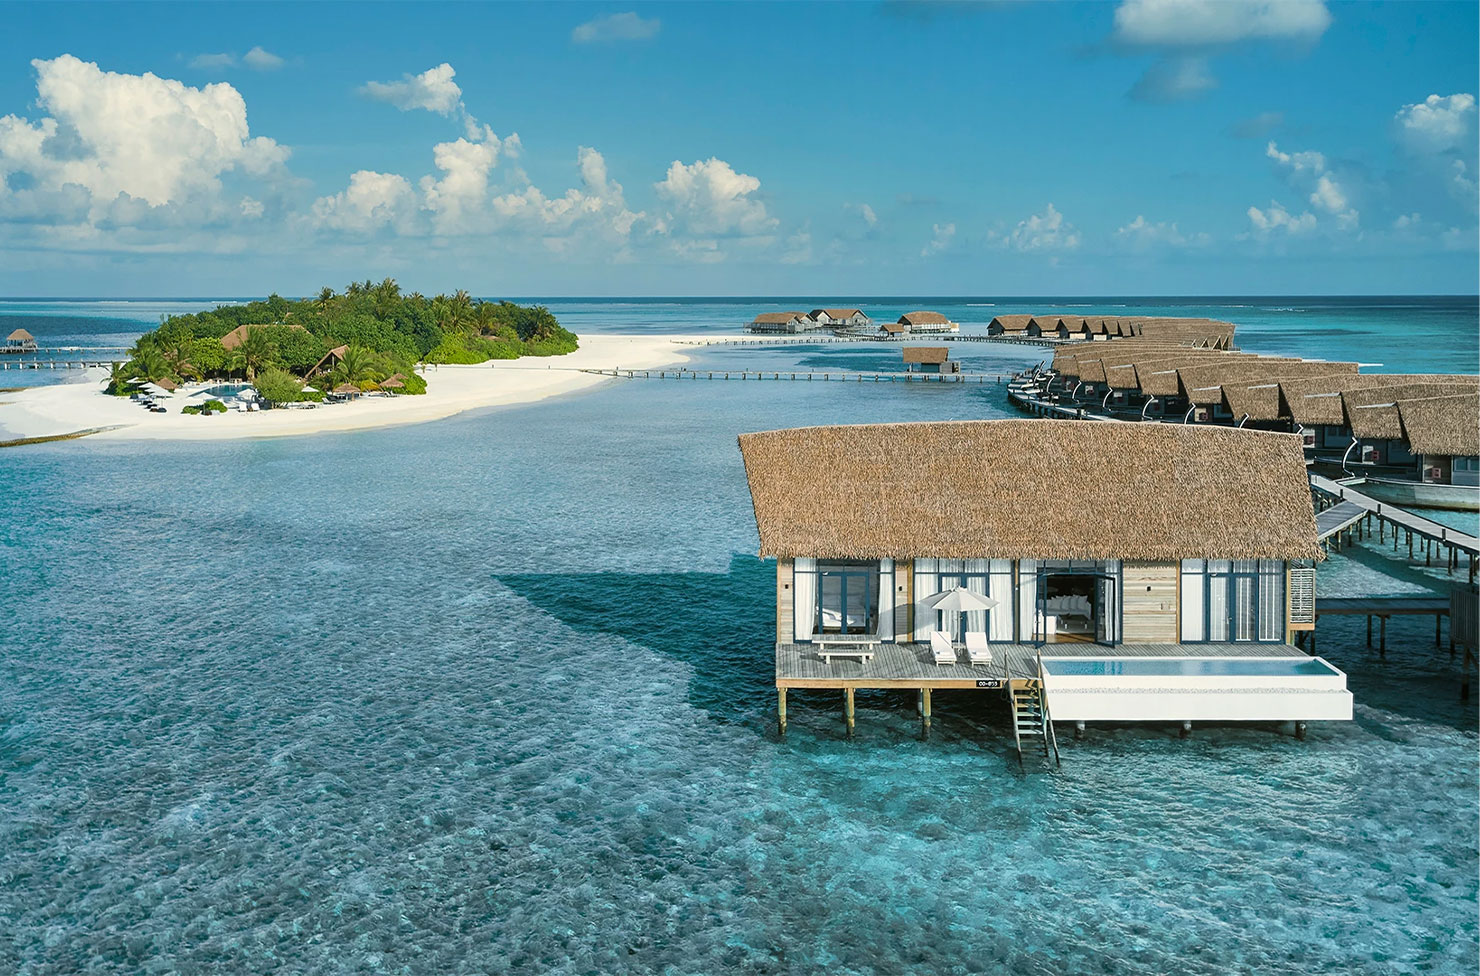 The Best Hotels In The Maldives For A Perfect Island Holiday | URBAN ...